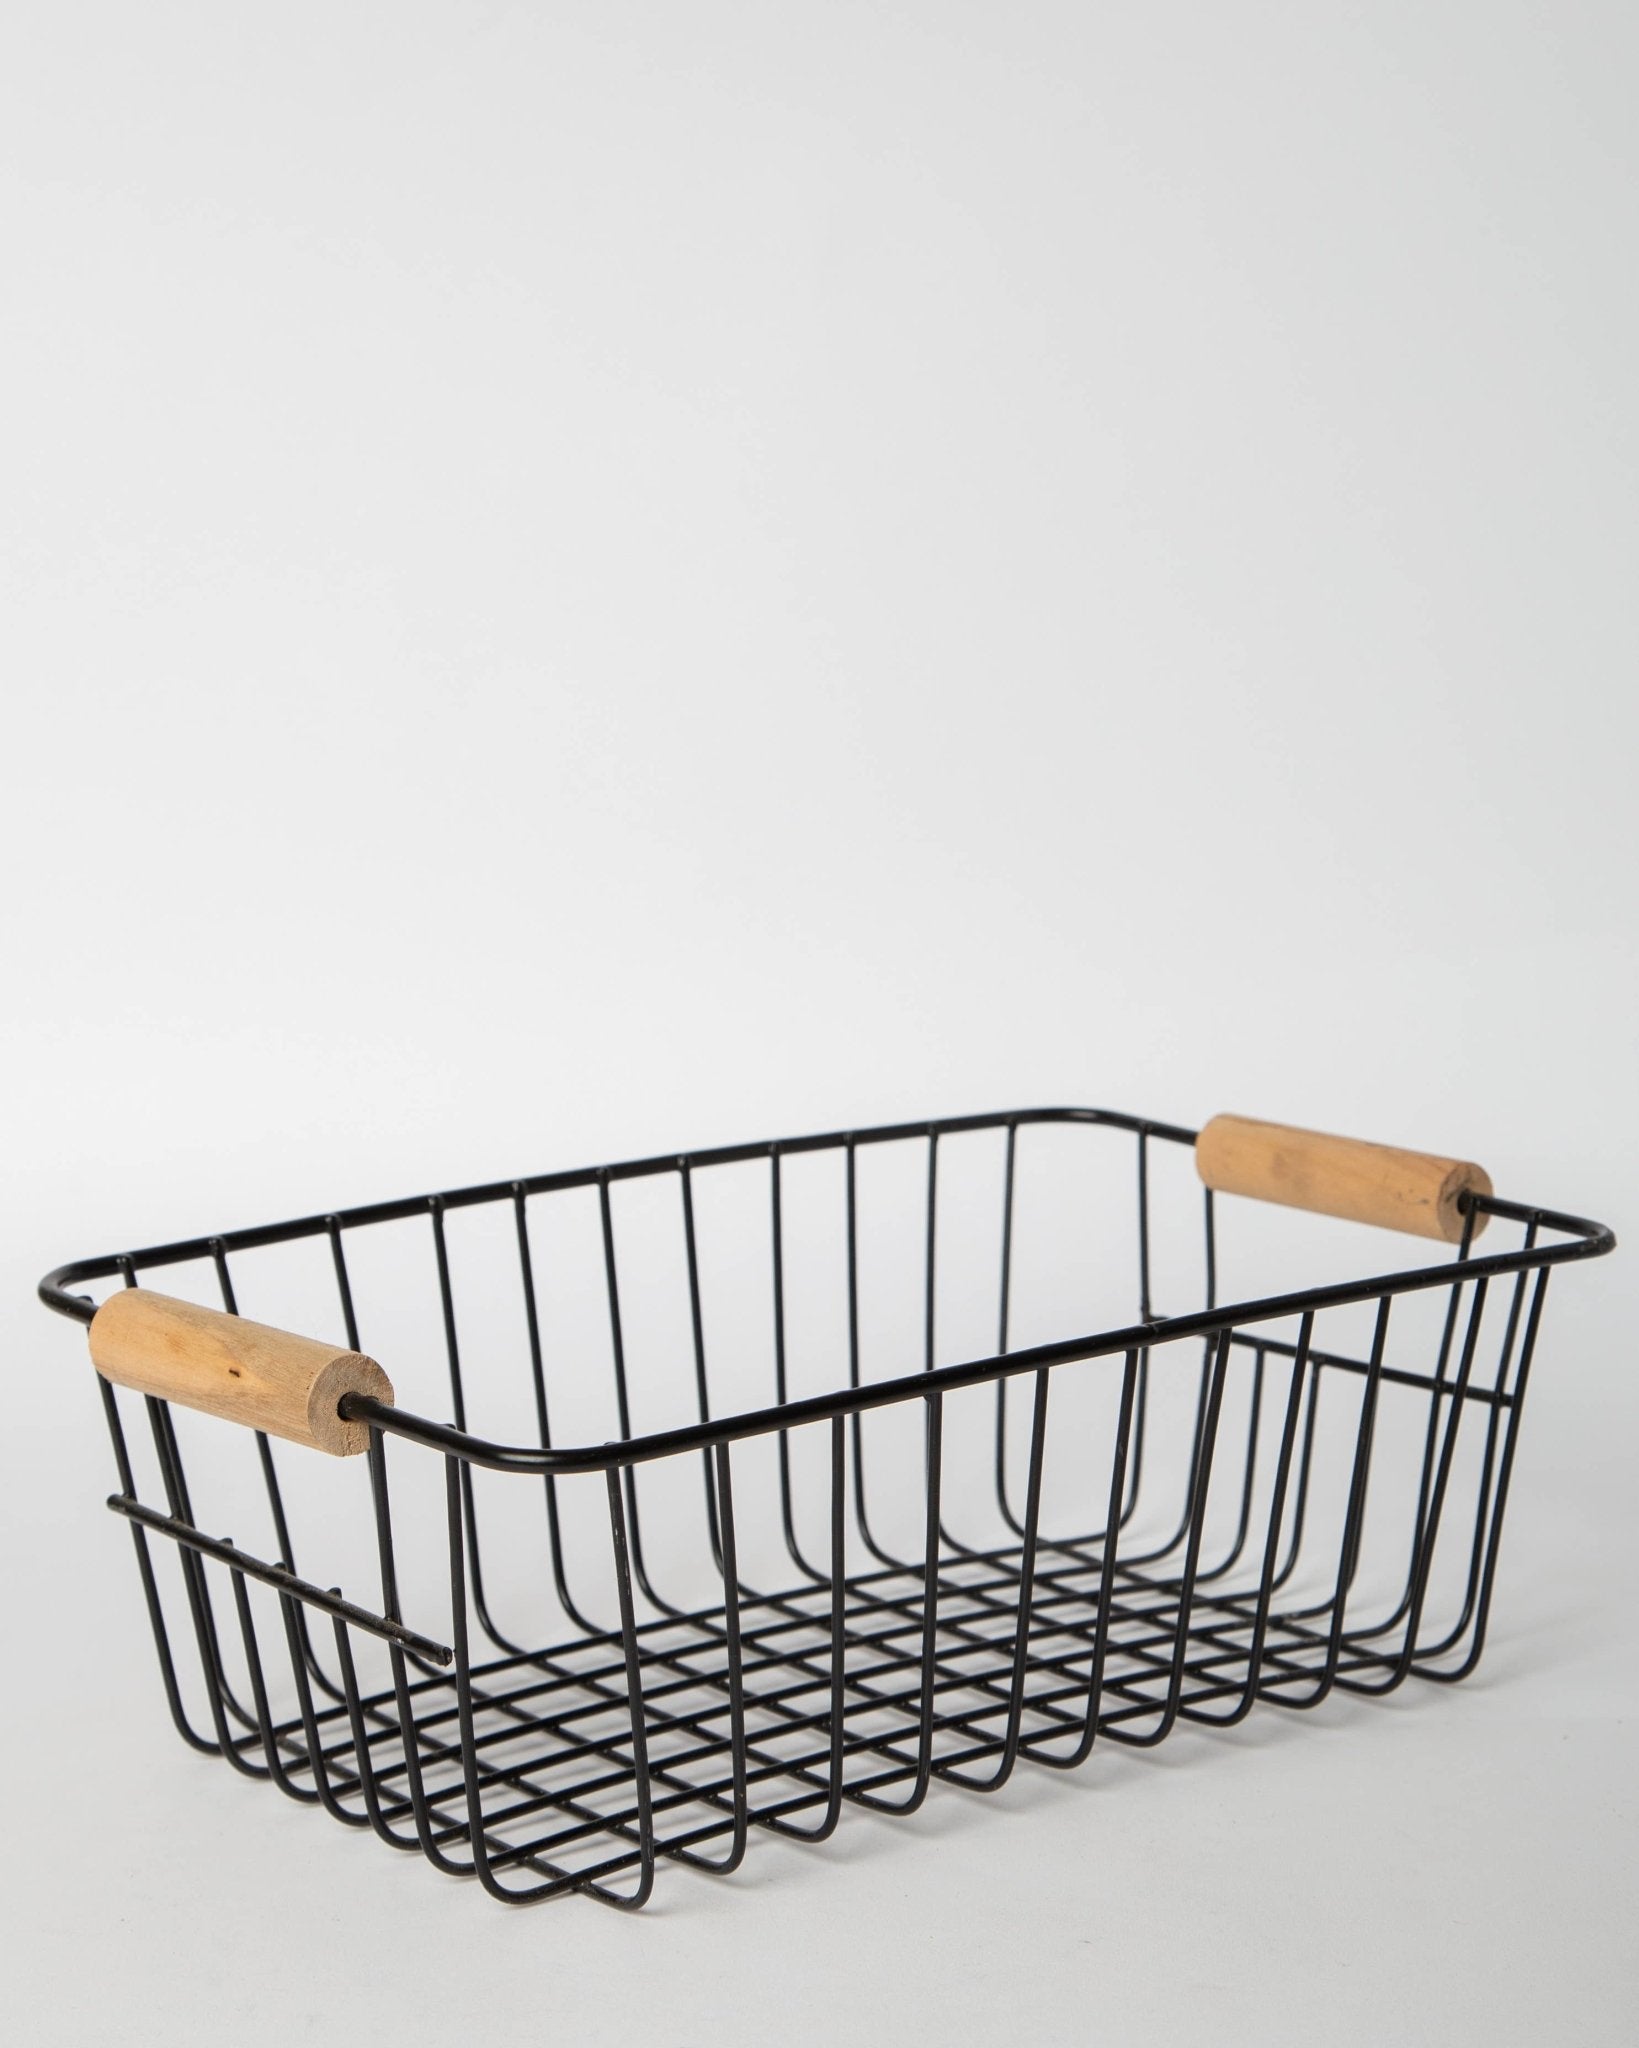 Porto Boutique - 330 - Iron Basket with wooden handles - Fenwick & OliverPorto Boutique - 330 - Iron Basket with wooden handlesPorto BoutiqueFenwick & OliverCF11810MMBLC11